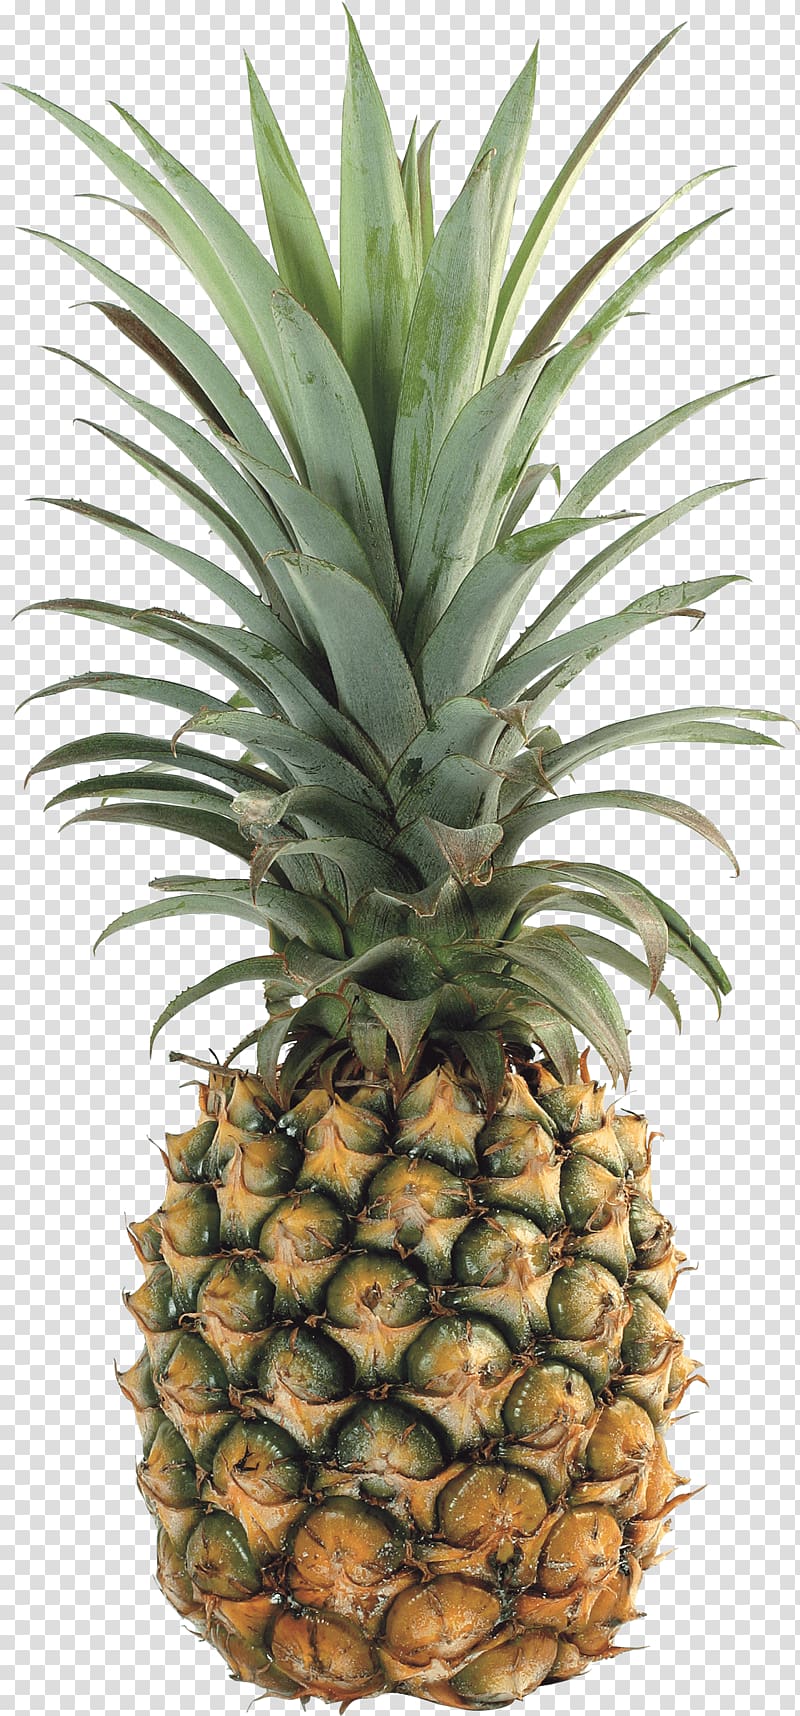 Upside-down cake Pineapple Tropical fruit, Pineapple transparent background PNG clipart